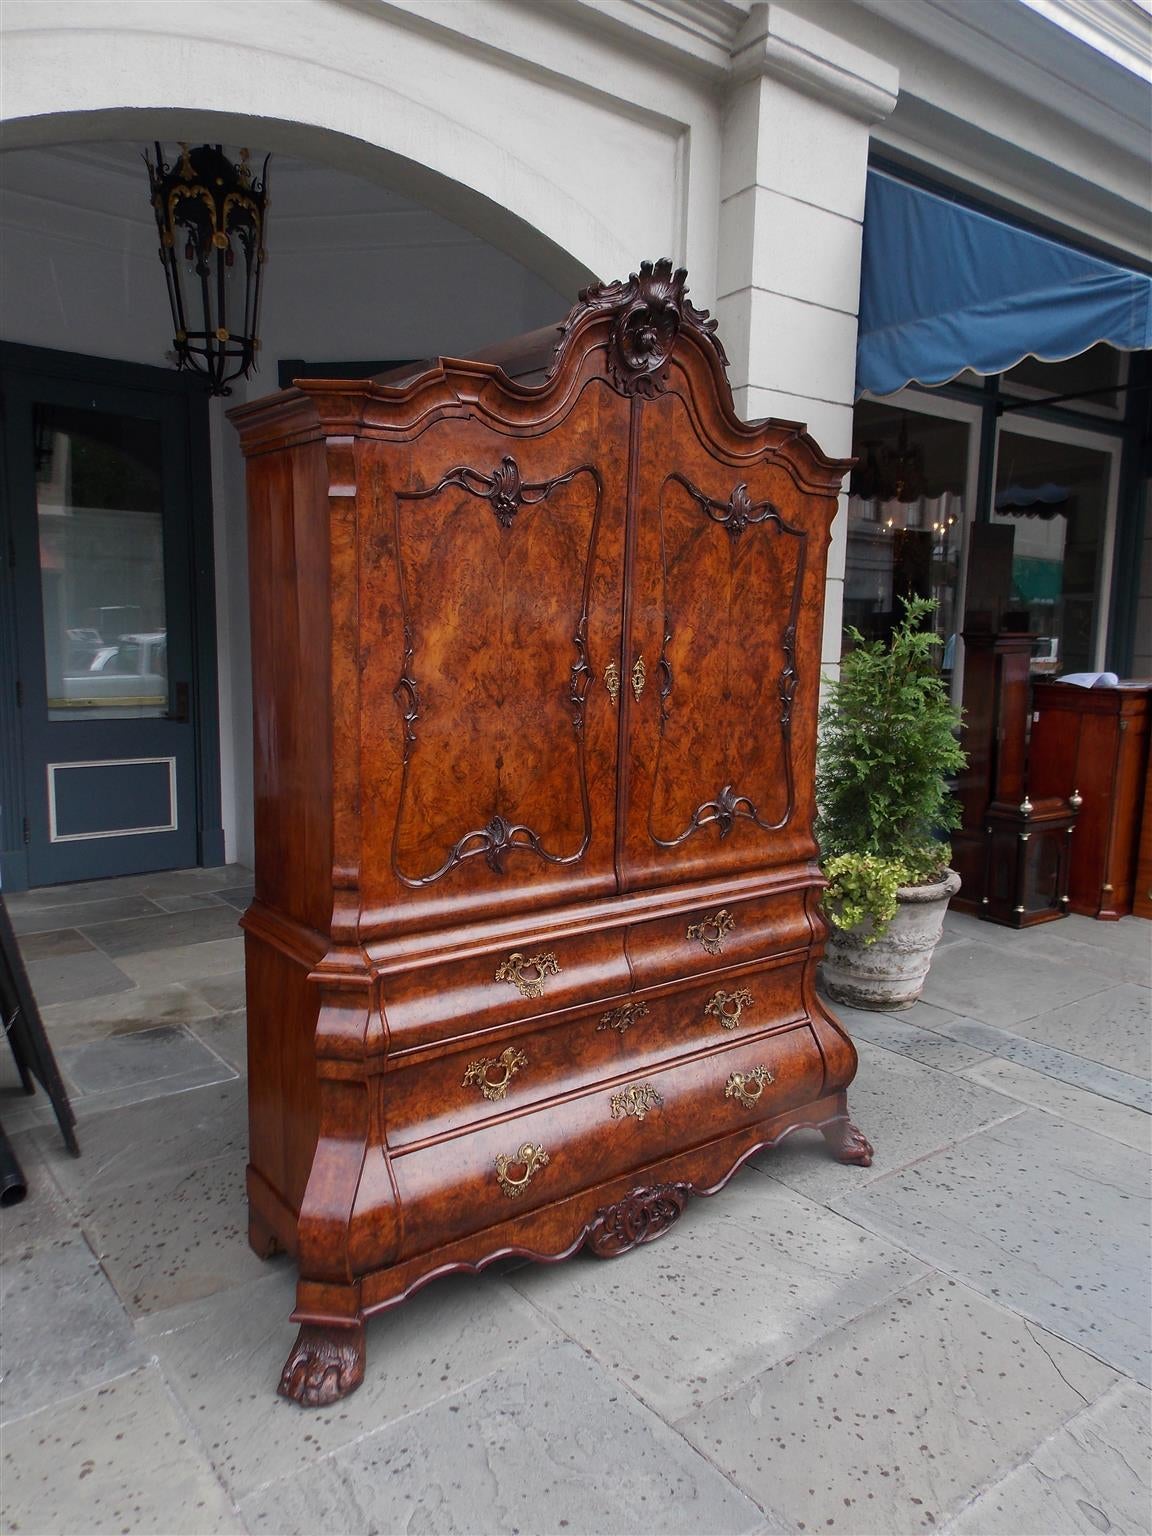 Dutch Chippendale burl walnut bombay graduated three-drawer linen press with serpentine carved floral cartouche, flanking foliage hinged doors, original floral brasses, interior shelving with three drawers, serpentine carved foliage skirt, and